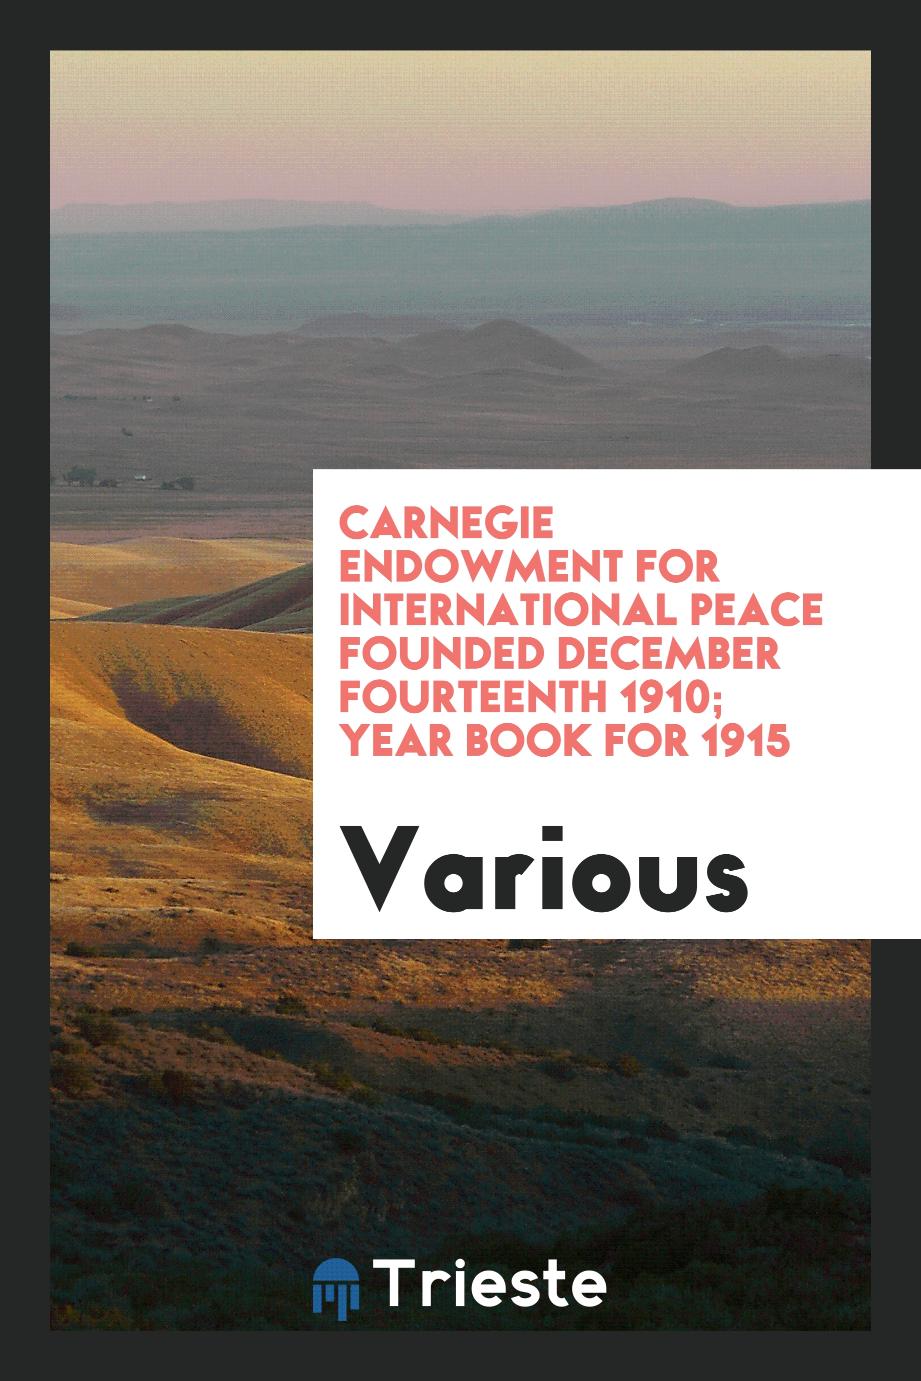 Carnegie Endowment for International Peace Founded December Fourteenth 1910; Year Book for 1915